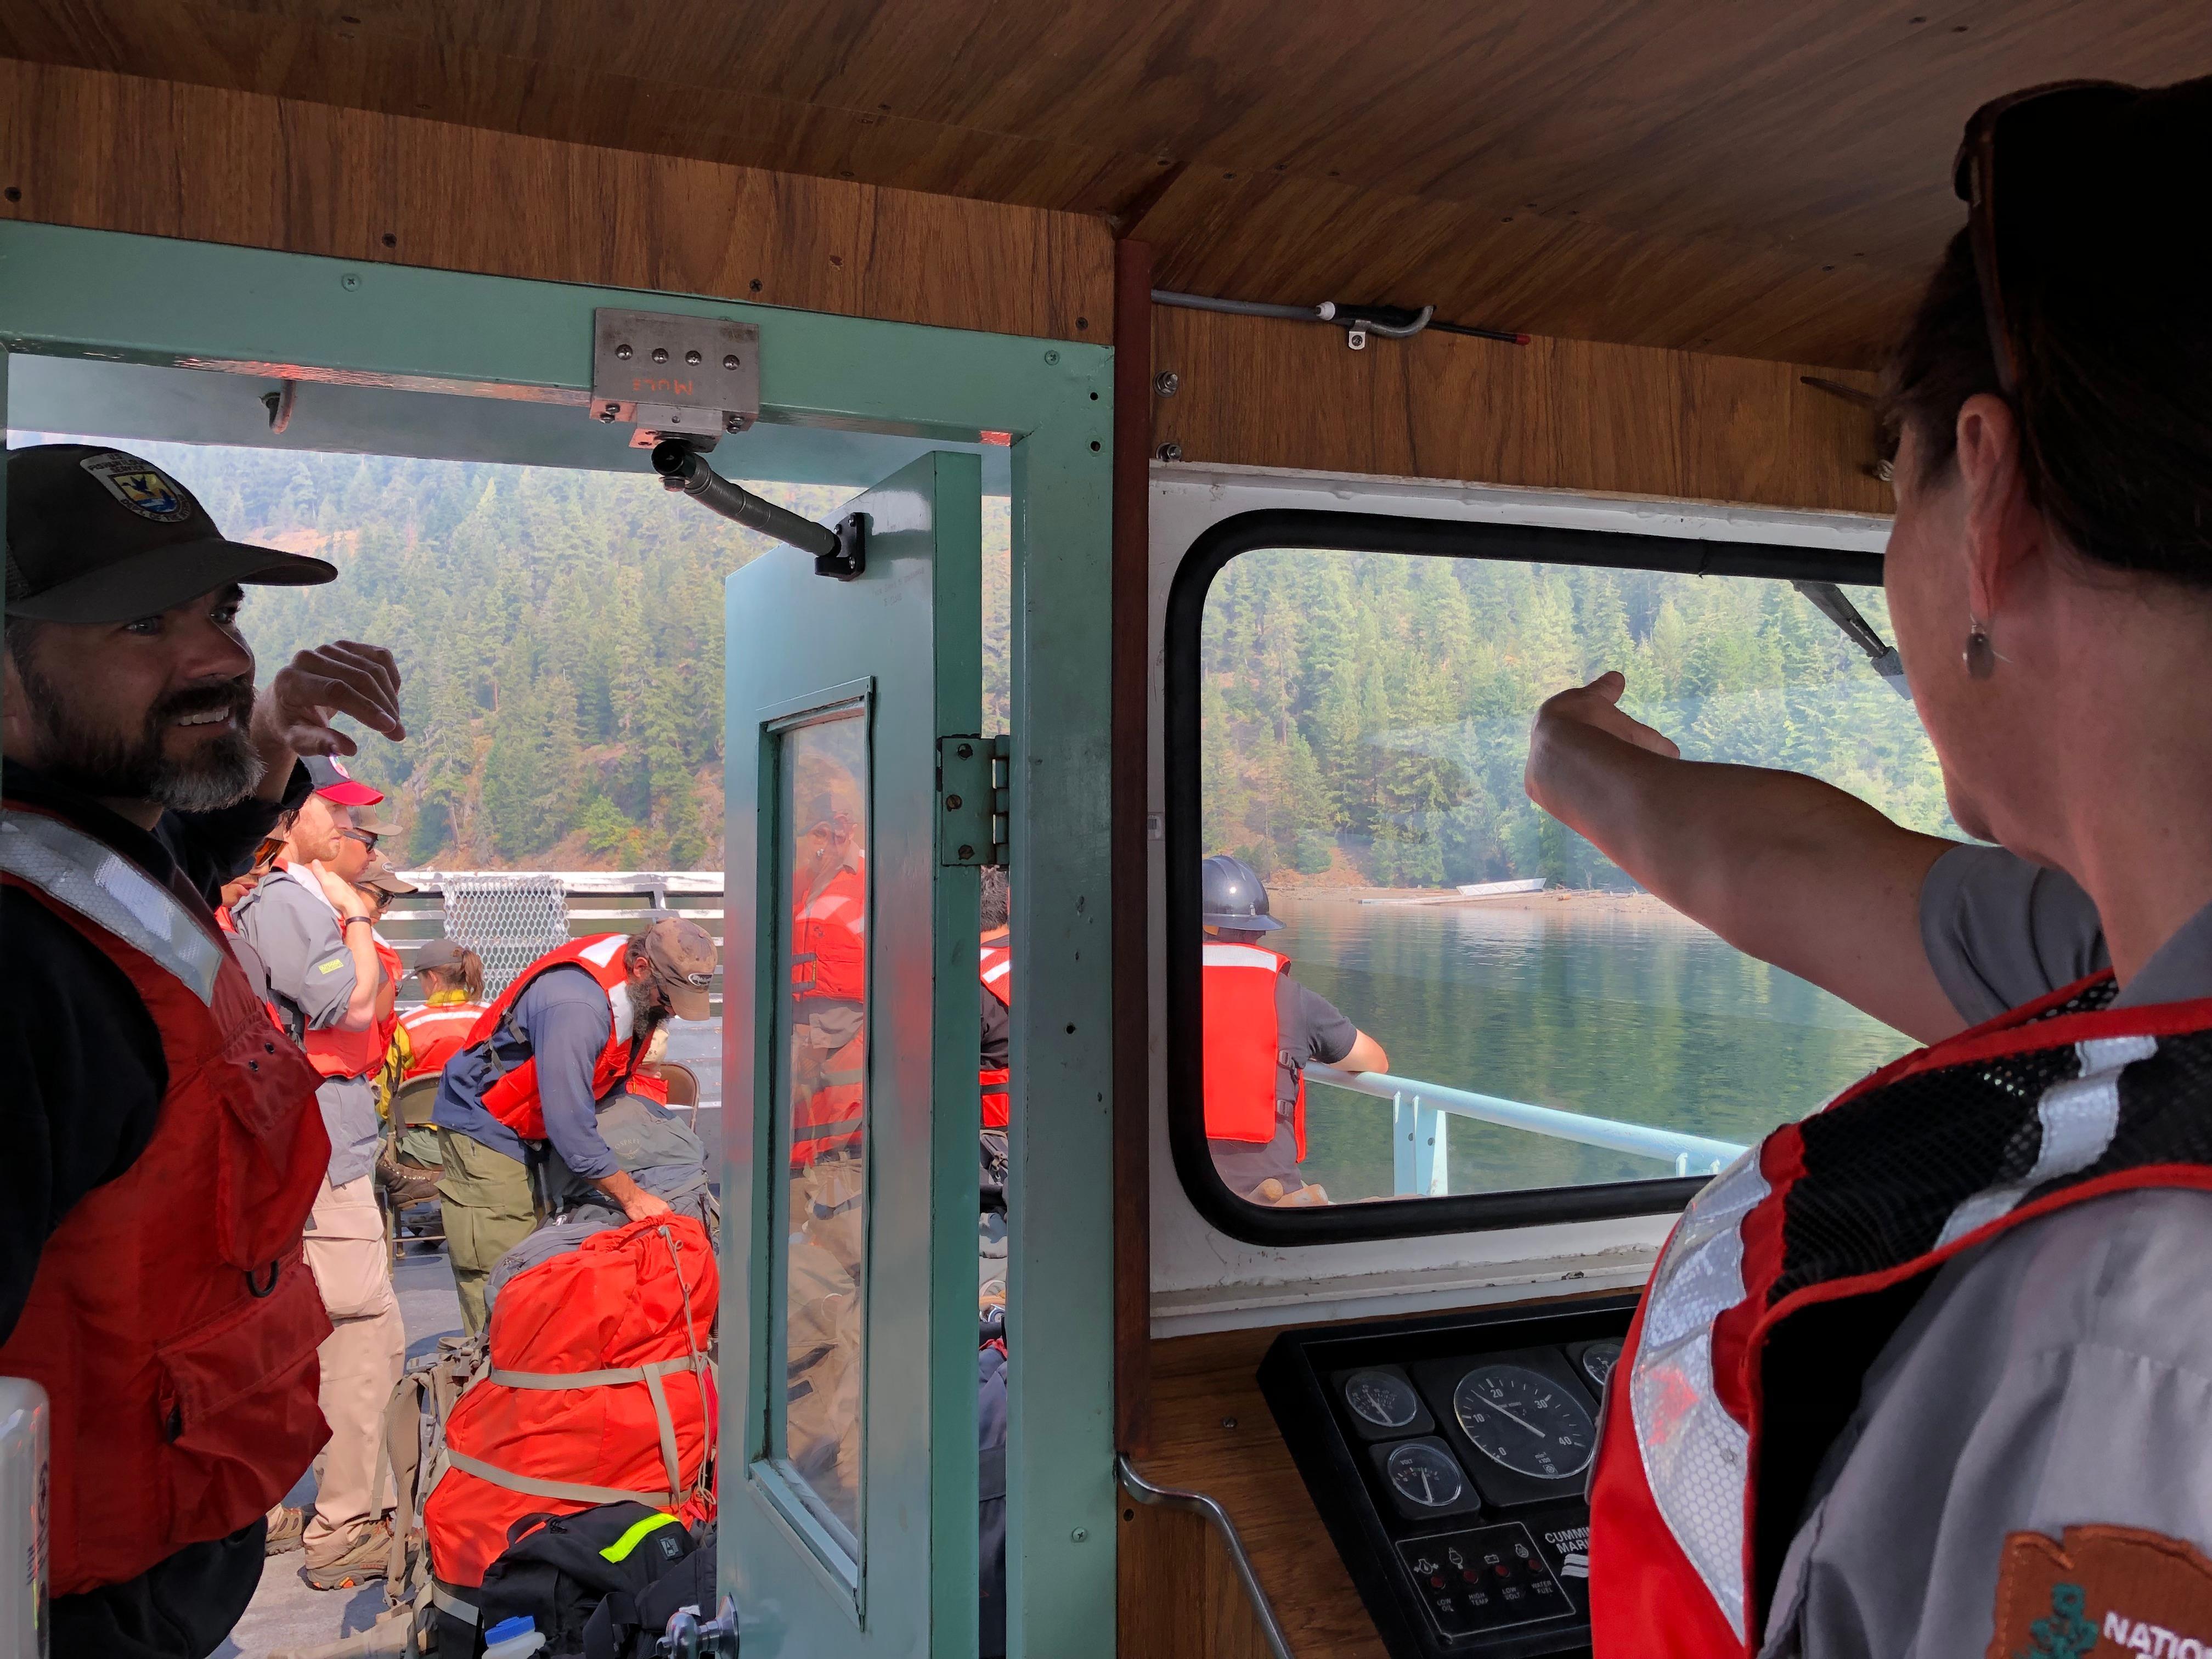 National Park Service boat operator shuttling firefighters to Hozomeen to conduct structure protection assessment.